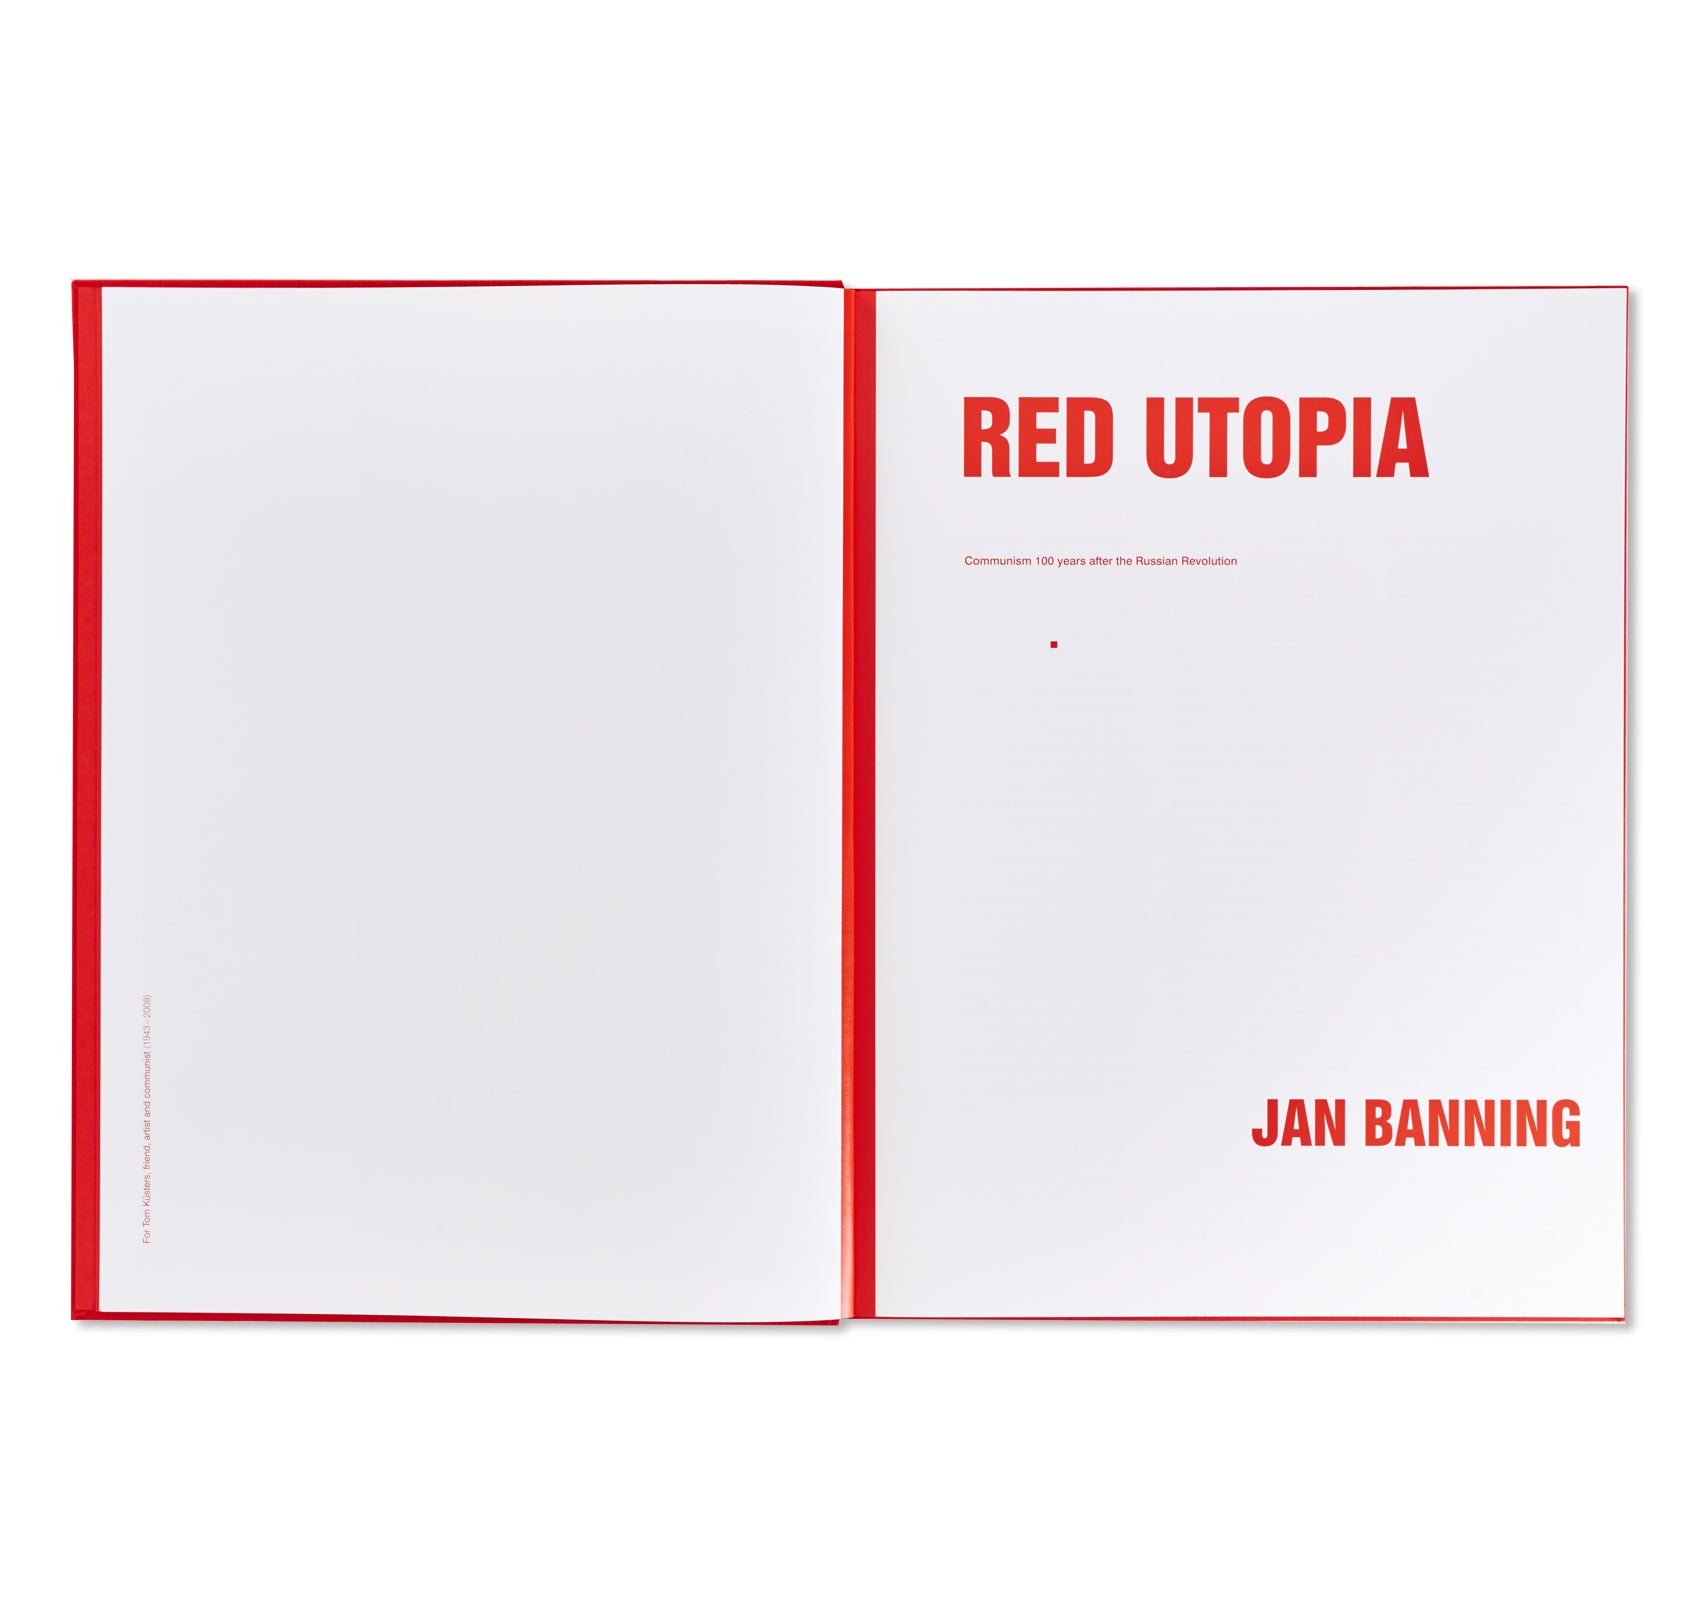 RED UTOPIA by Jan Banning